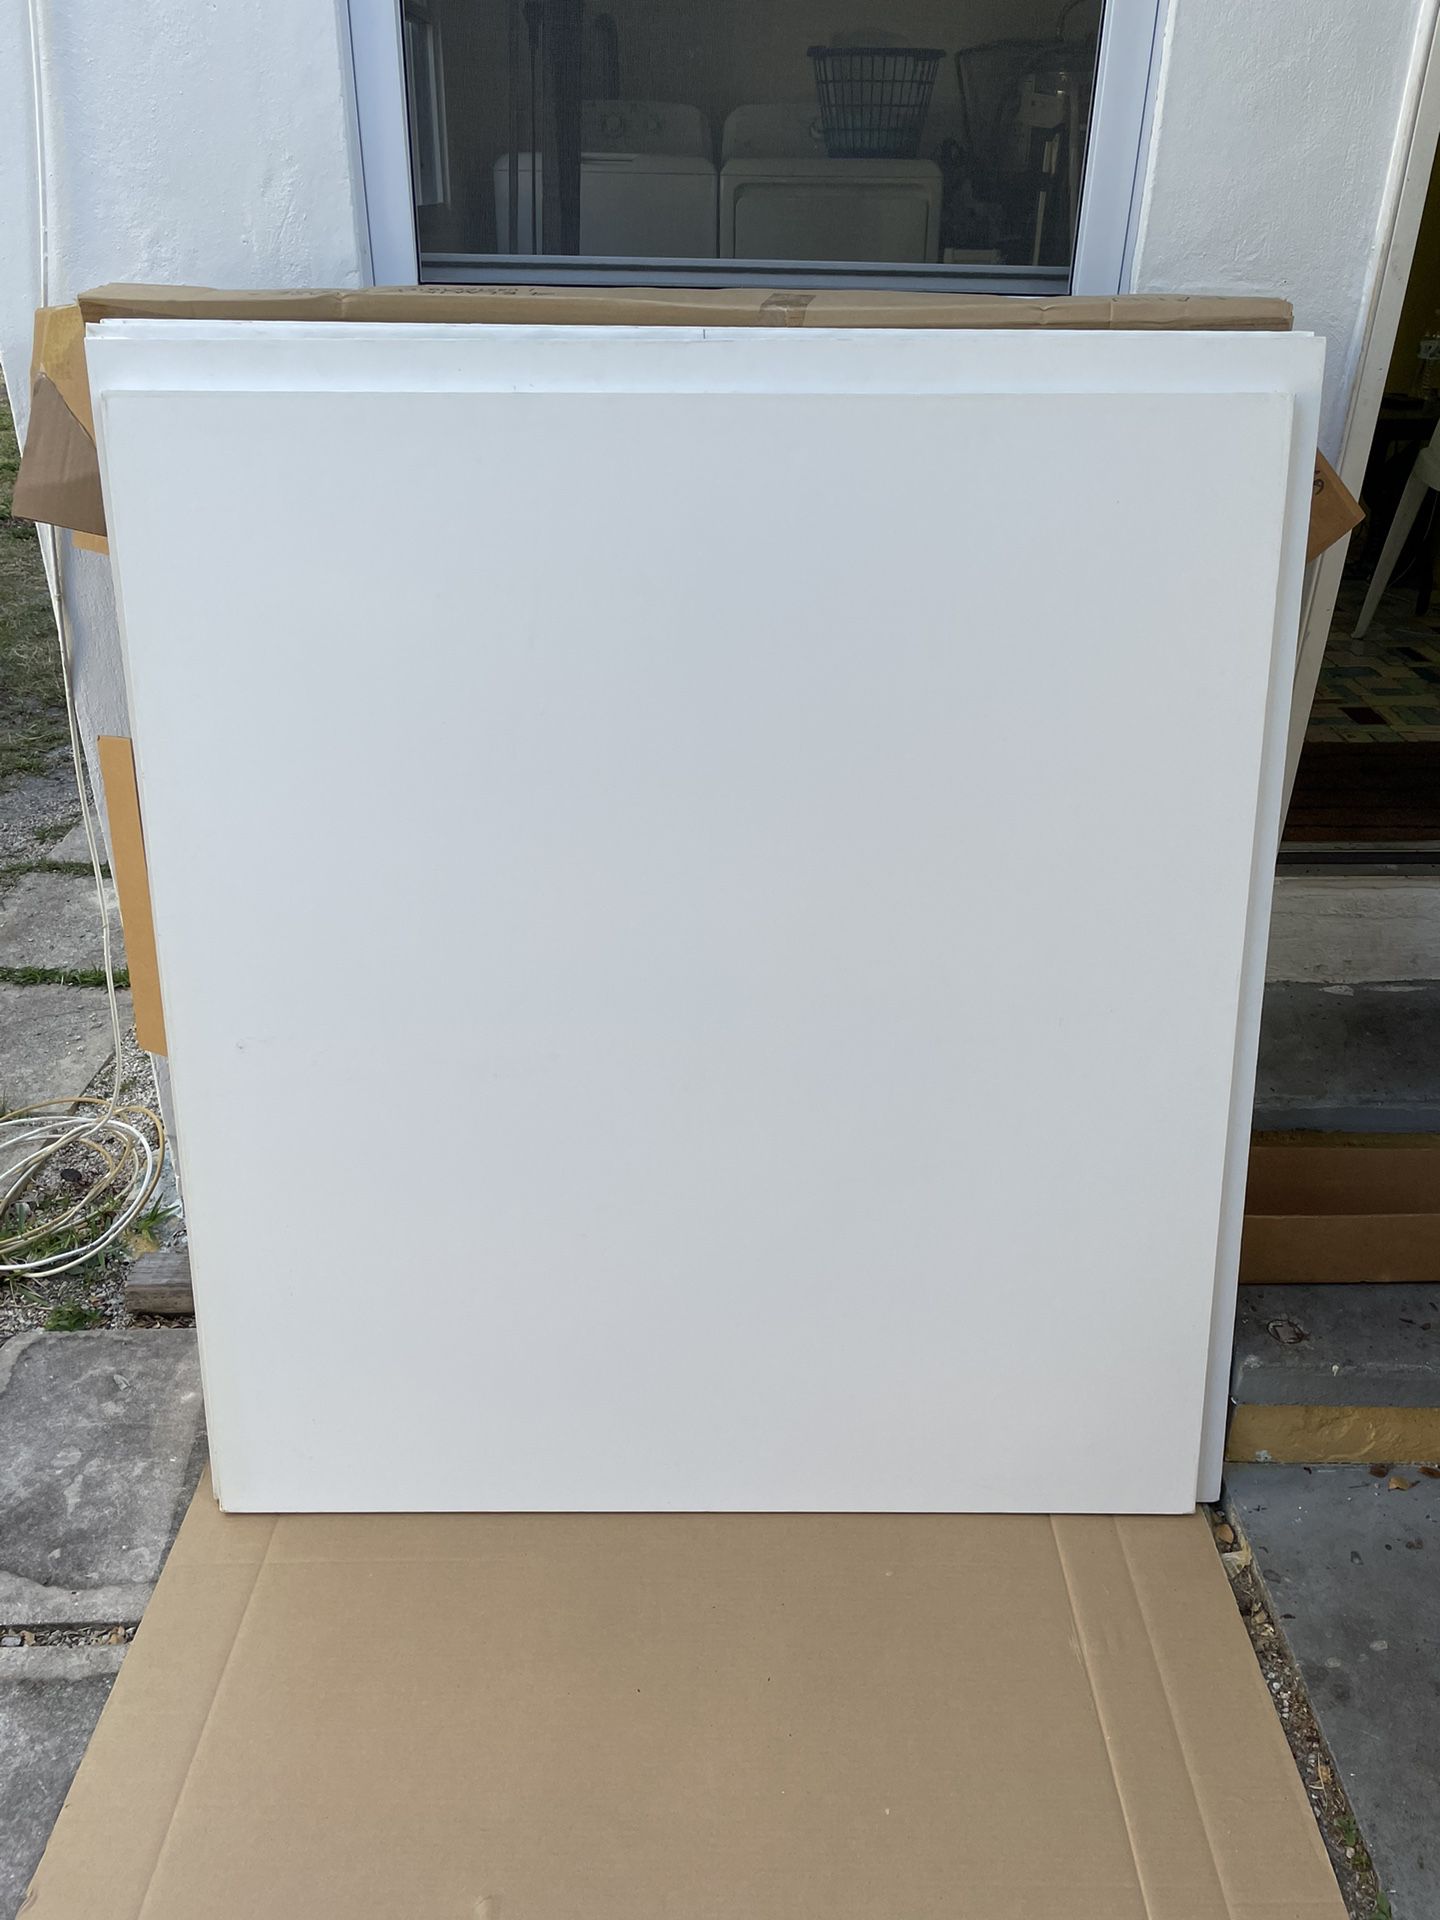 Large Blank Paint Canvases 